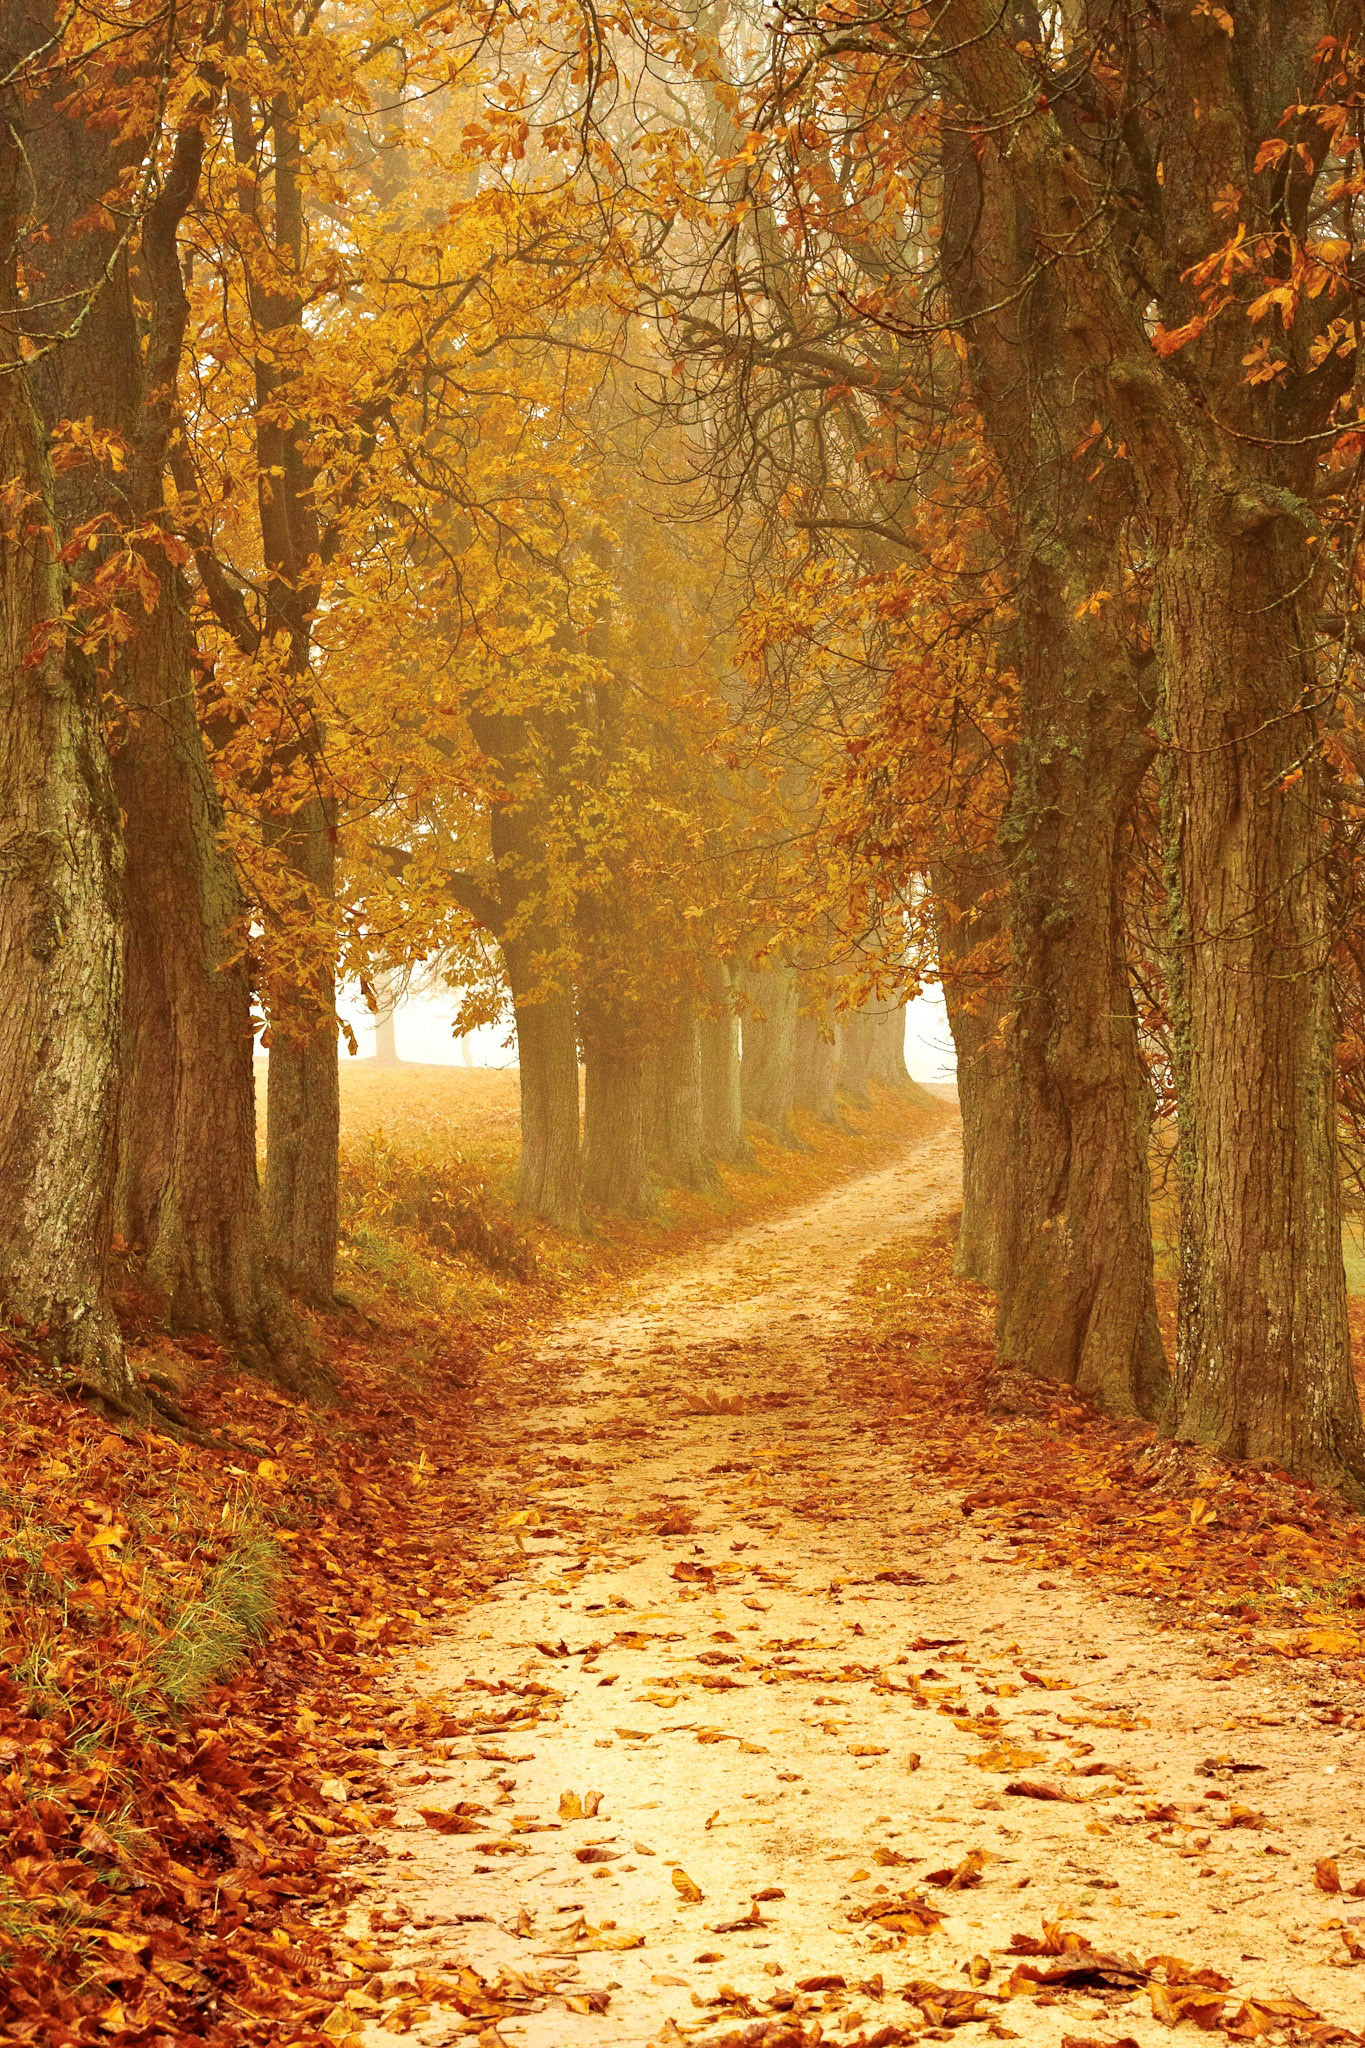 Golden Path In Autumn Between The Trees Image Free Stock Photo